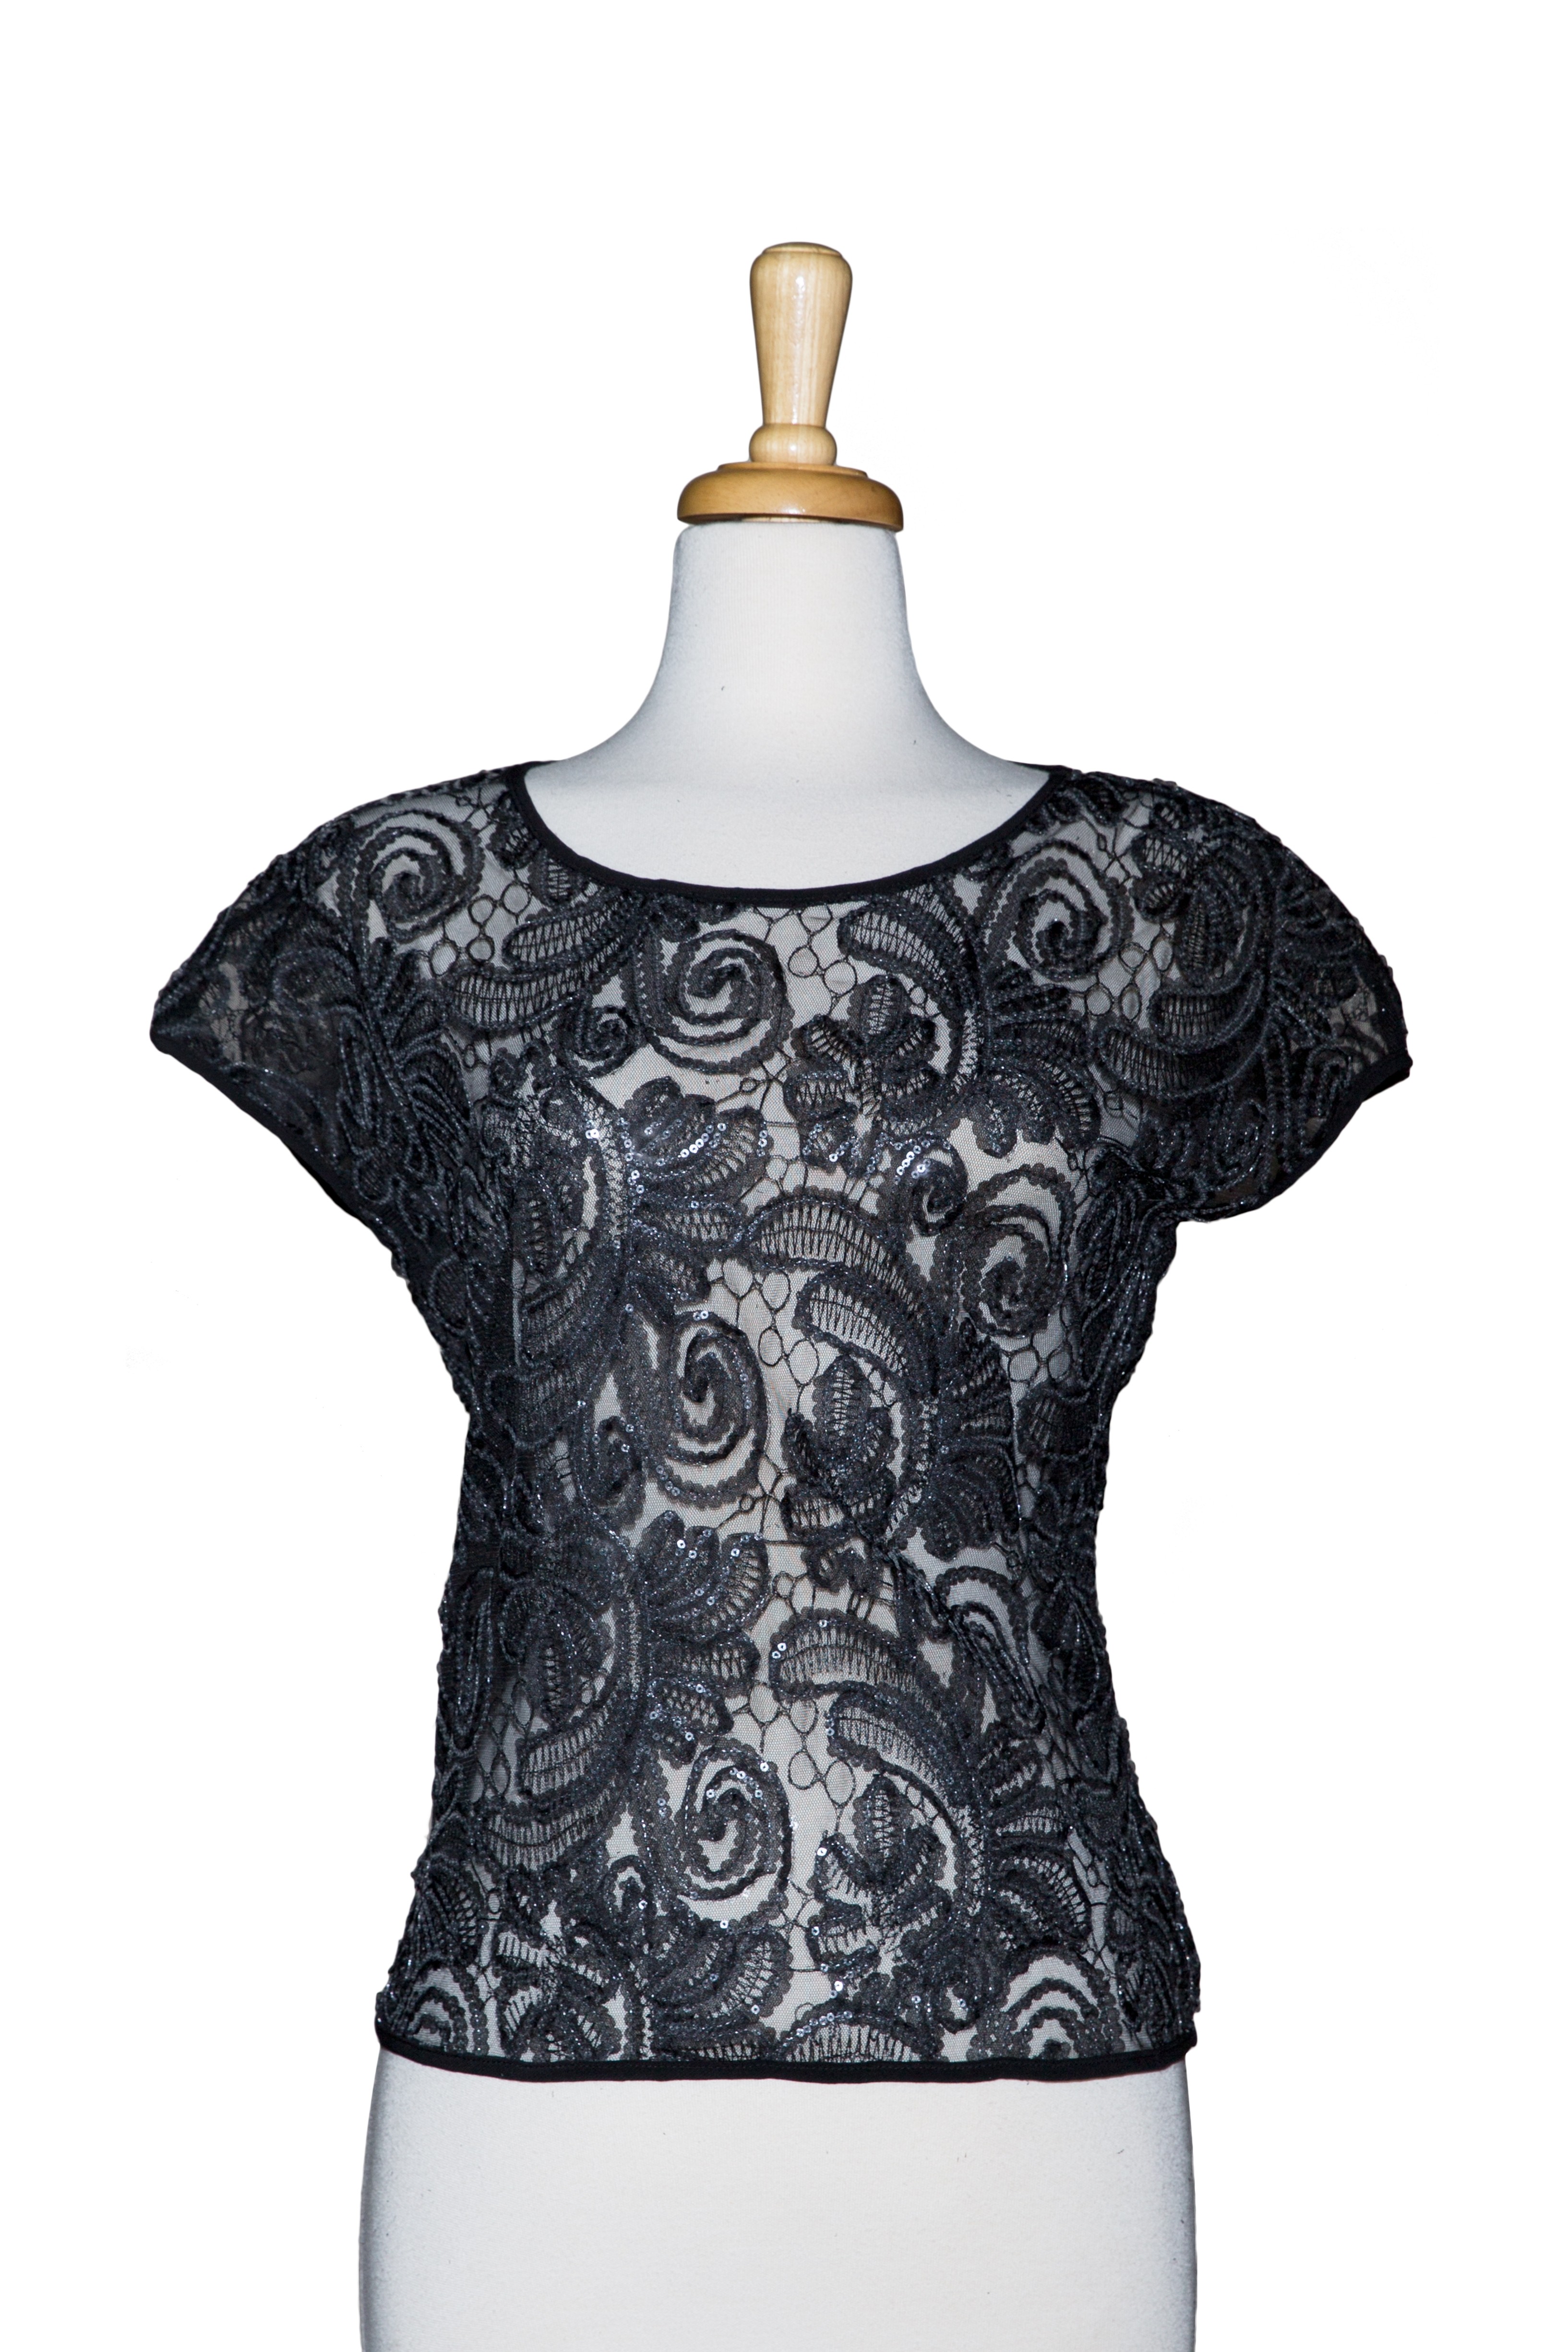 Black Paisley Clear Sequins Lace Lace Short Sleeve Top